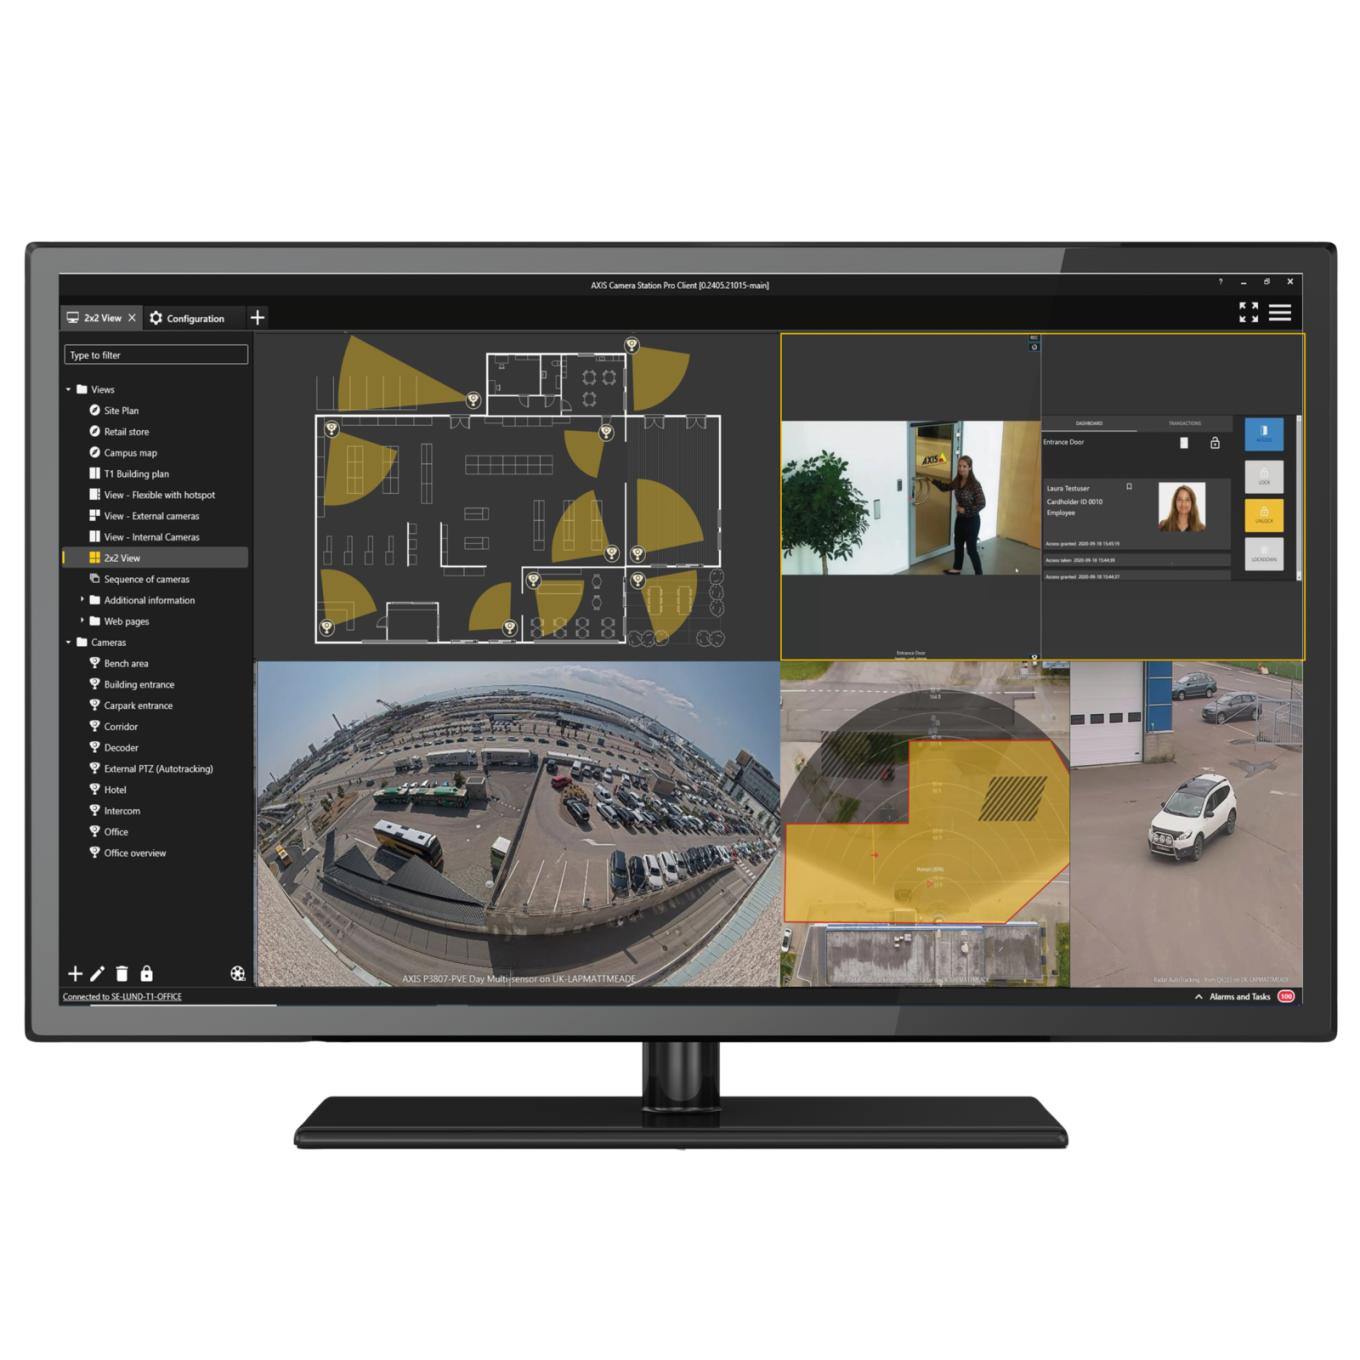 AXIS Camera Station Pro | Axis Communications